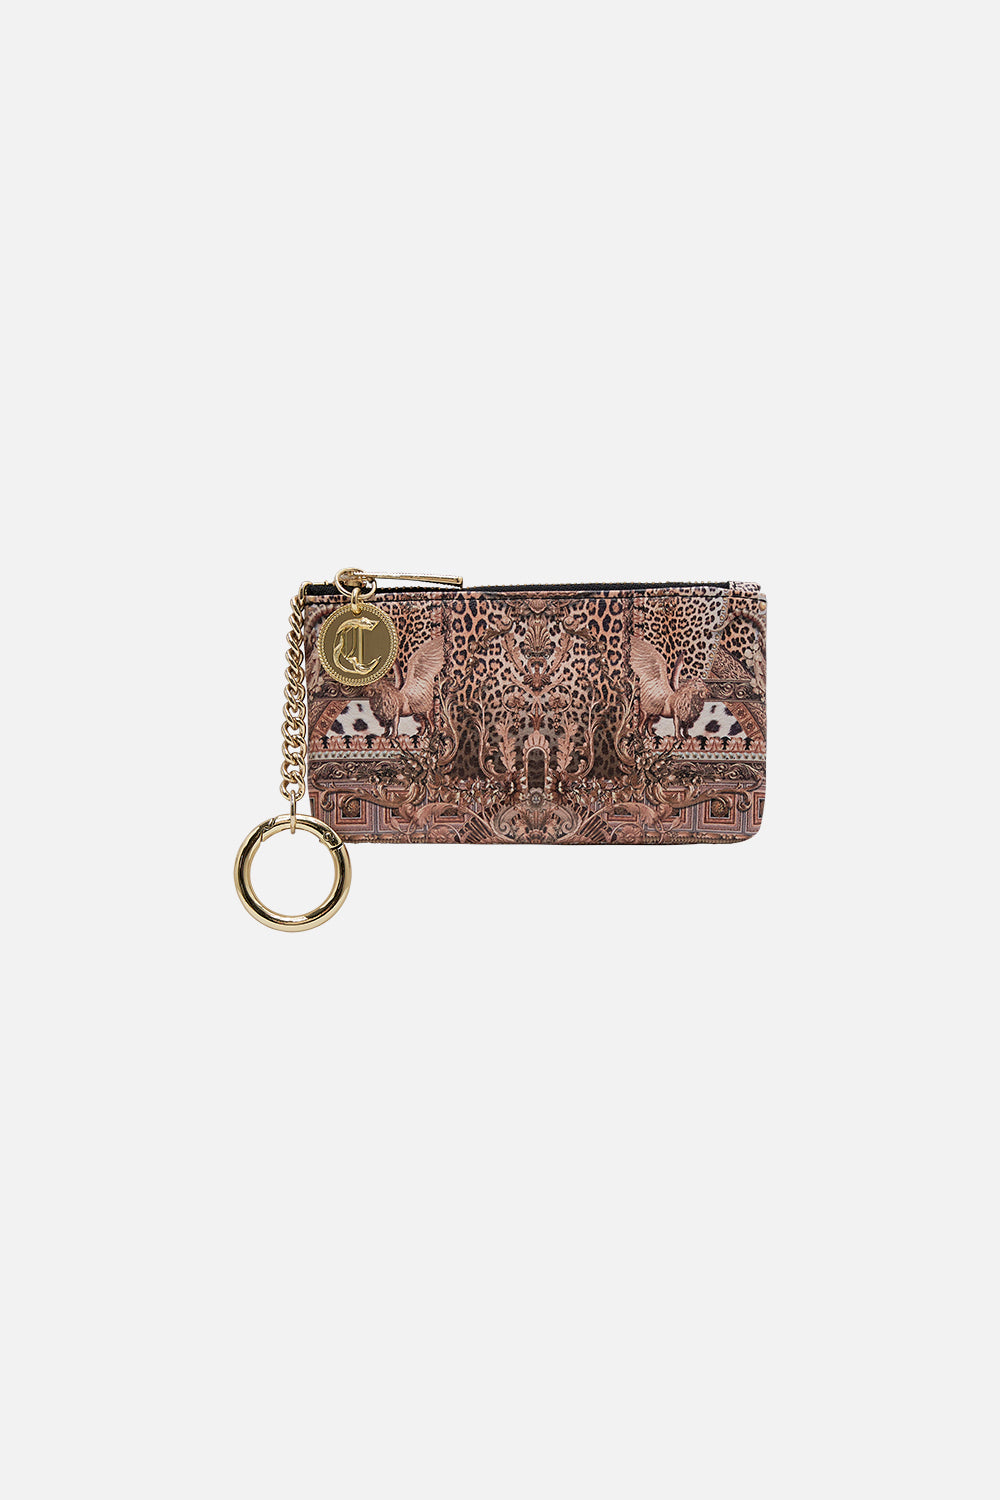 Product view of CAMILLA leopard print cardholder pouch in Standing Ovation print 